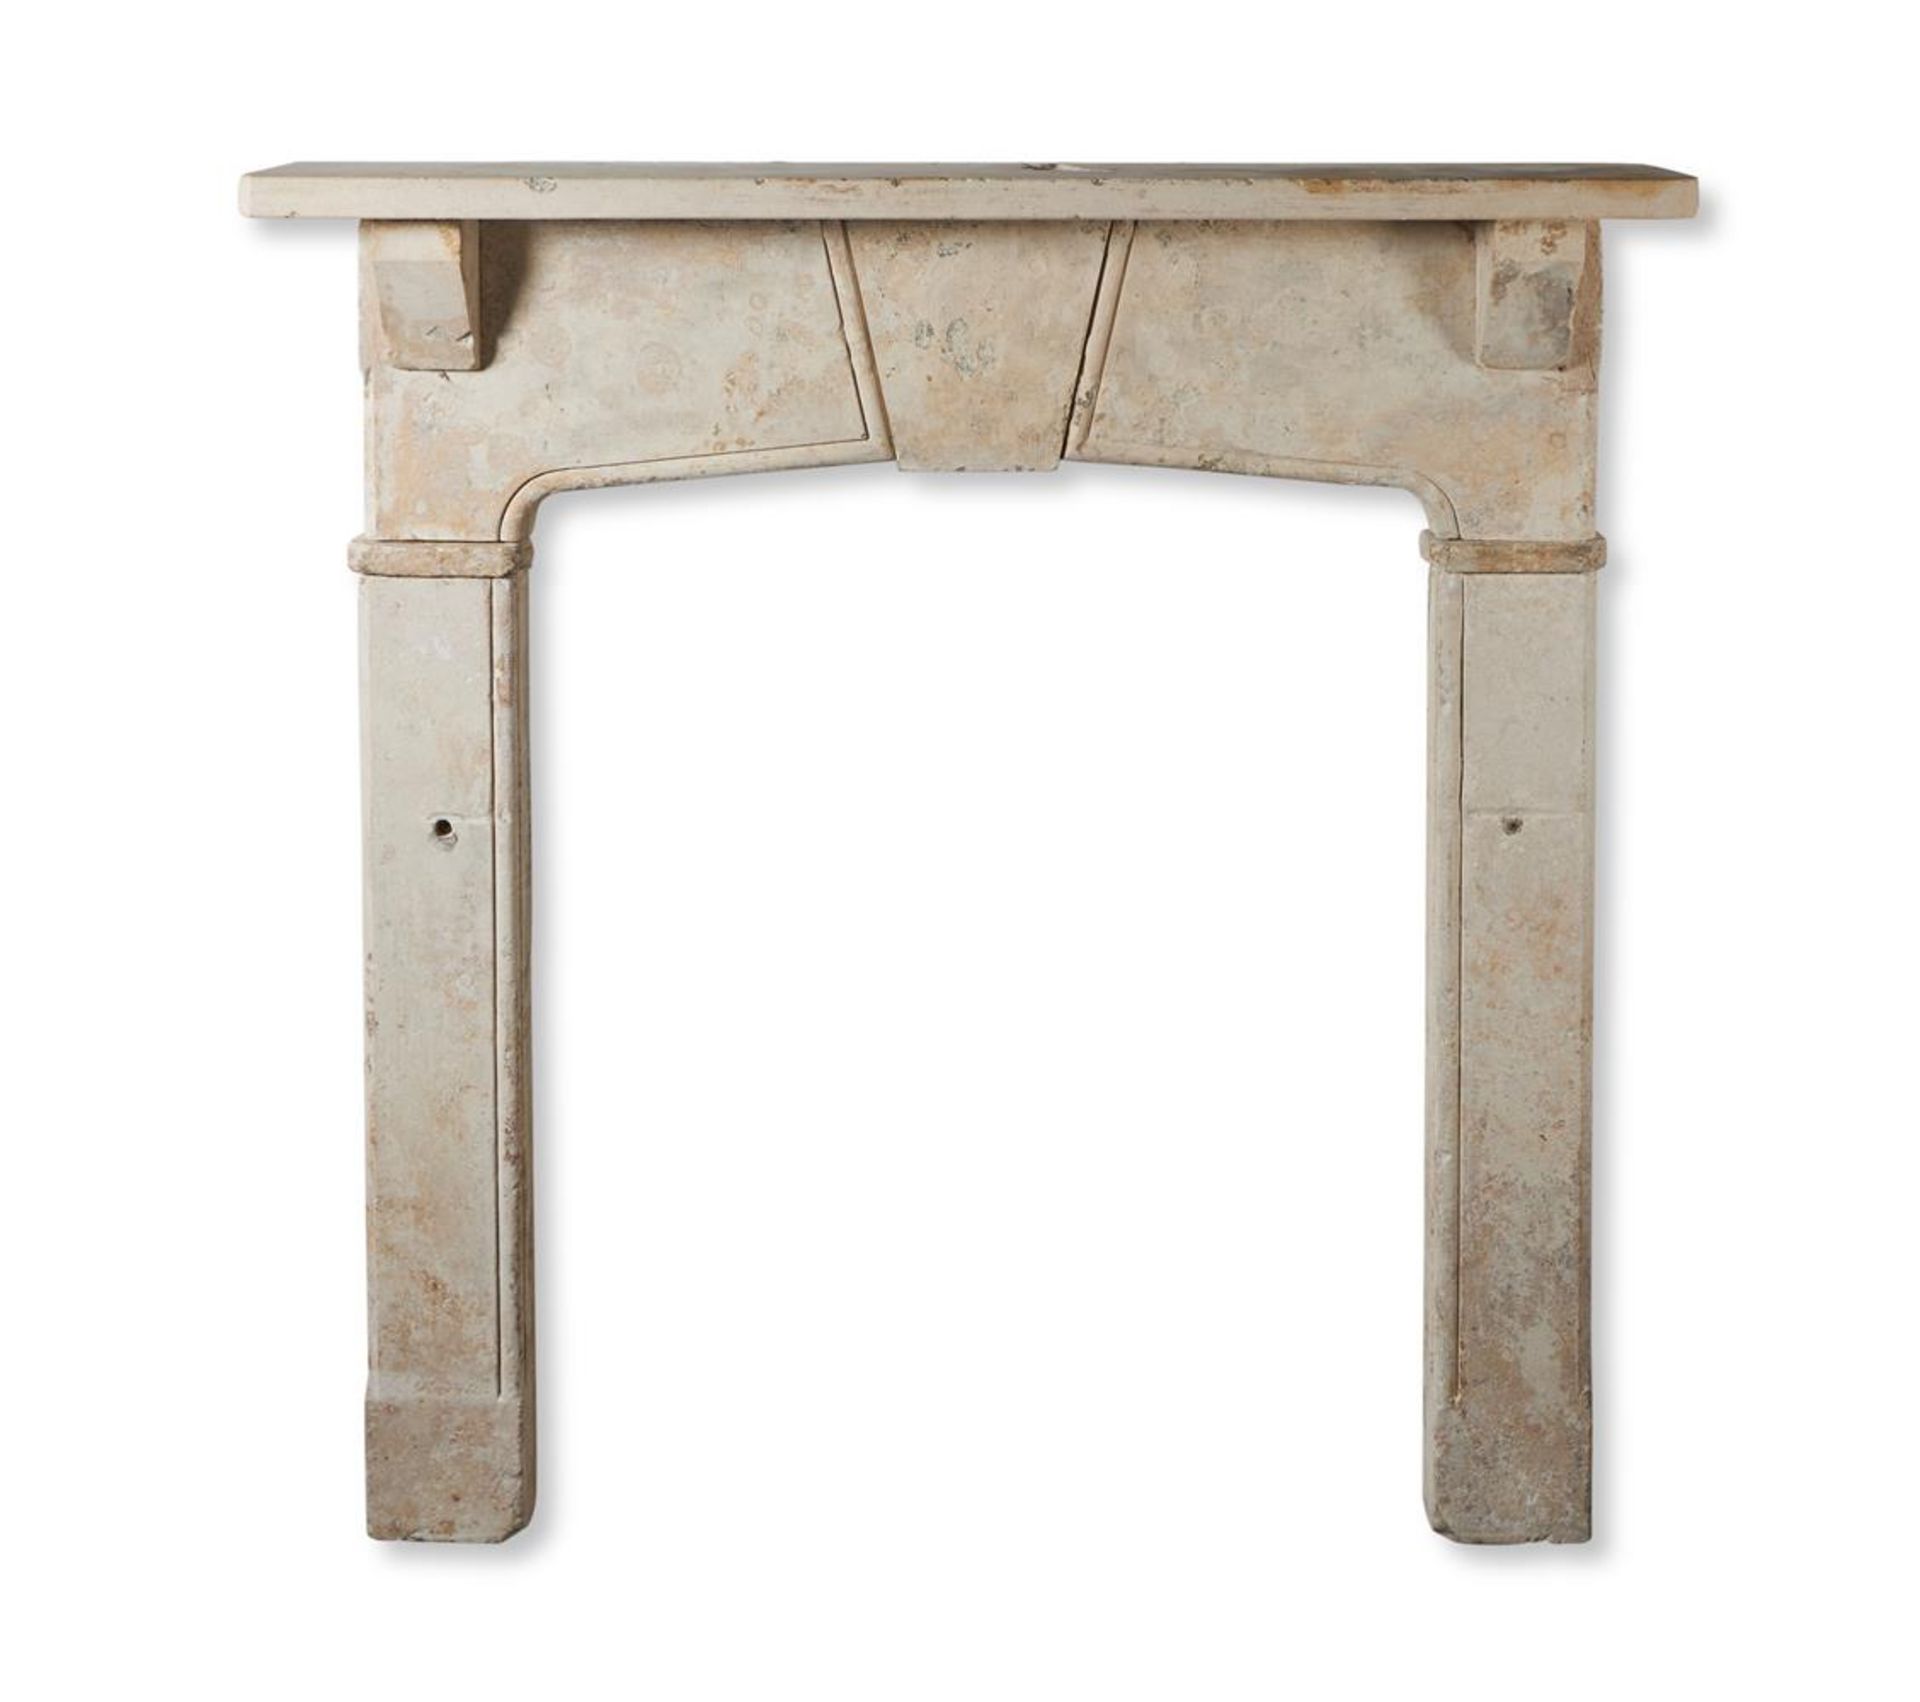 A LIMESTONE FIRE SURROUND, FRENCH, POSSIBLY EARLY 19TH CENTURY - Image 2 of 3